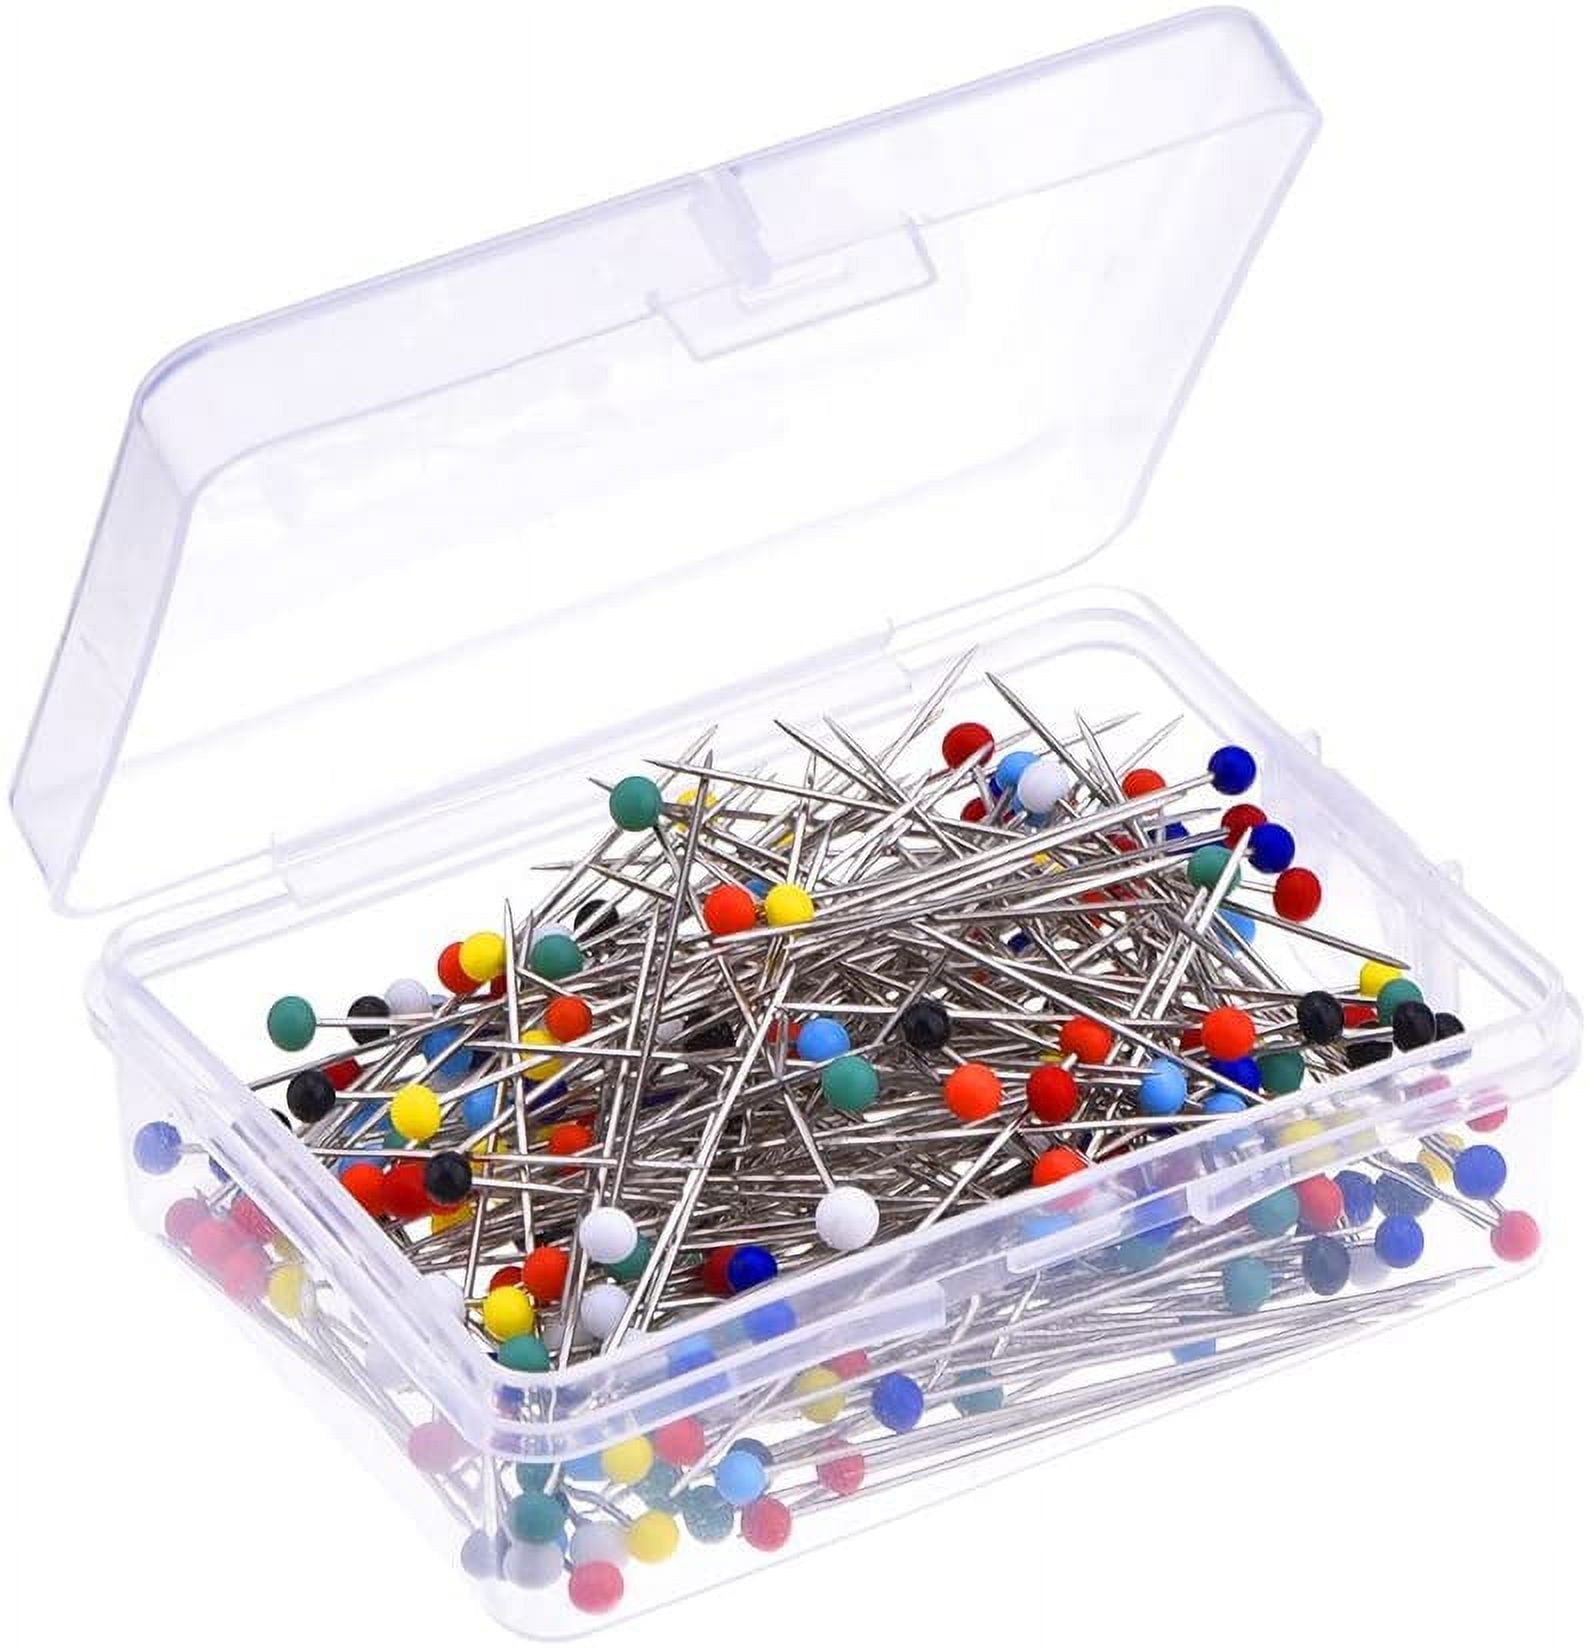 Urmspst 600PCS Sewing Pins (Upgraded), 1.5 inch Straight Pins with 4MM  Colored Ball Glass Head, Quilting Pins for Fabric, Jewelry DIY, Craft and